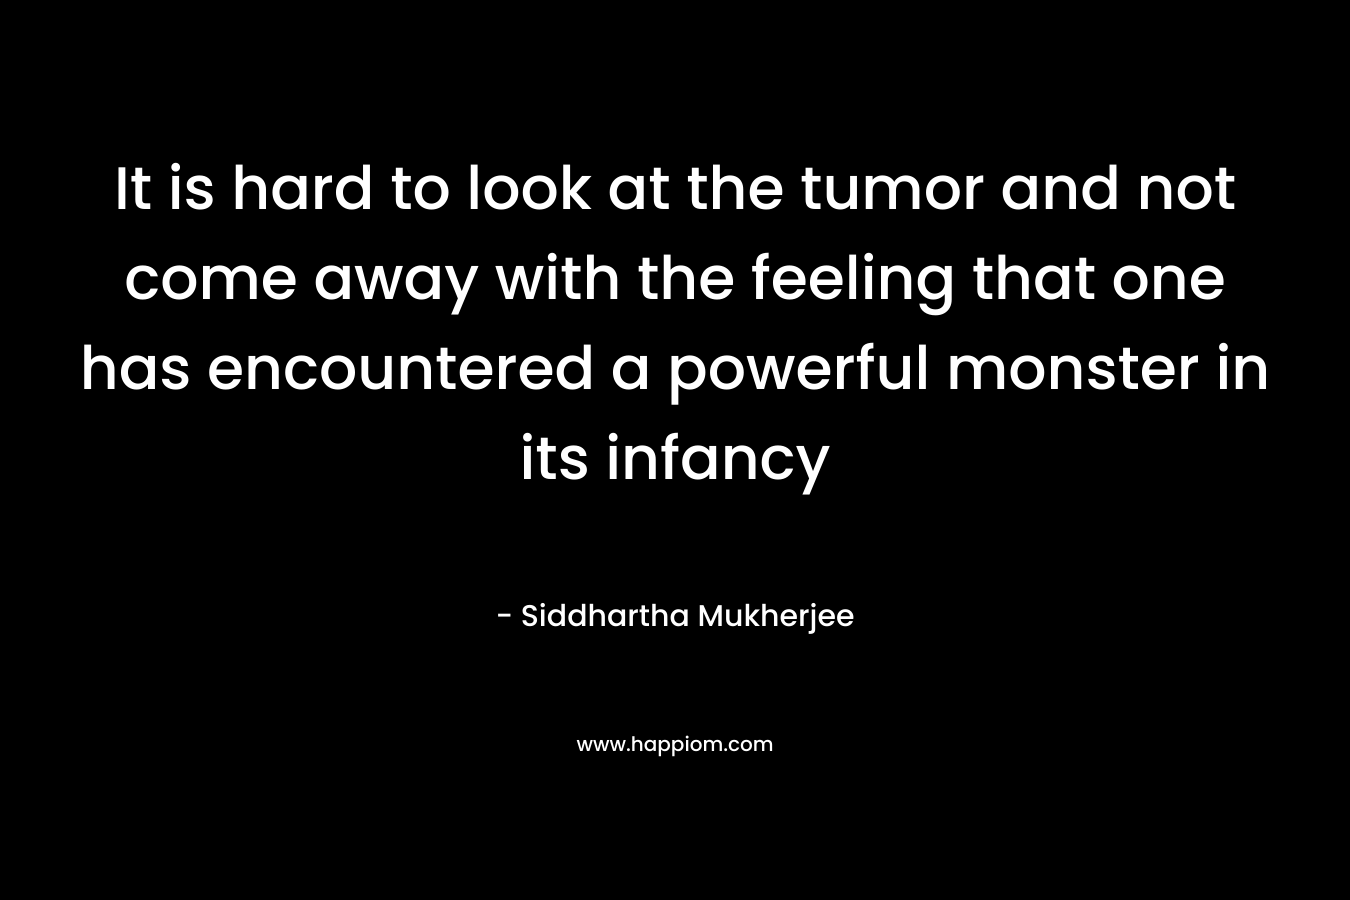 It is hard to look at the tumor and not come away with the feeling that one has encountered a powerful monster in its infancy – Siddhartha Mukherjee